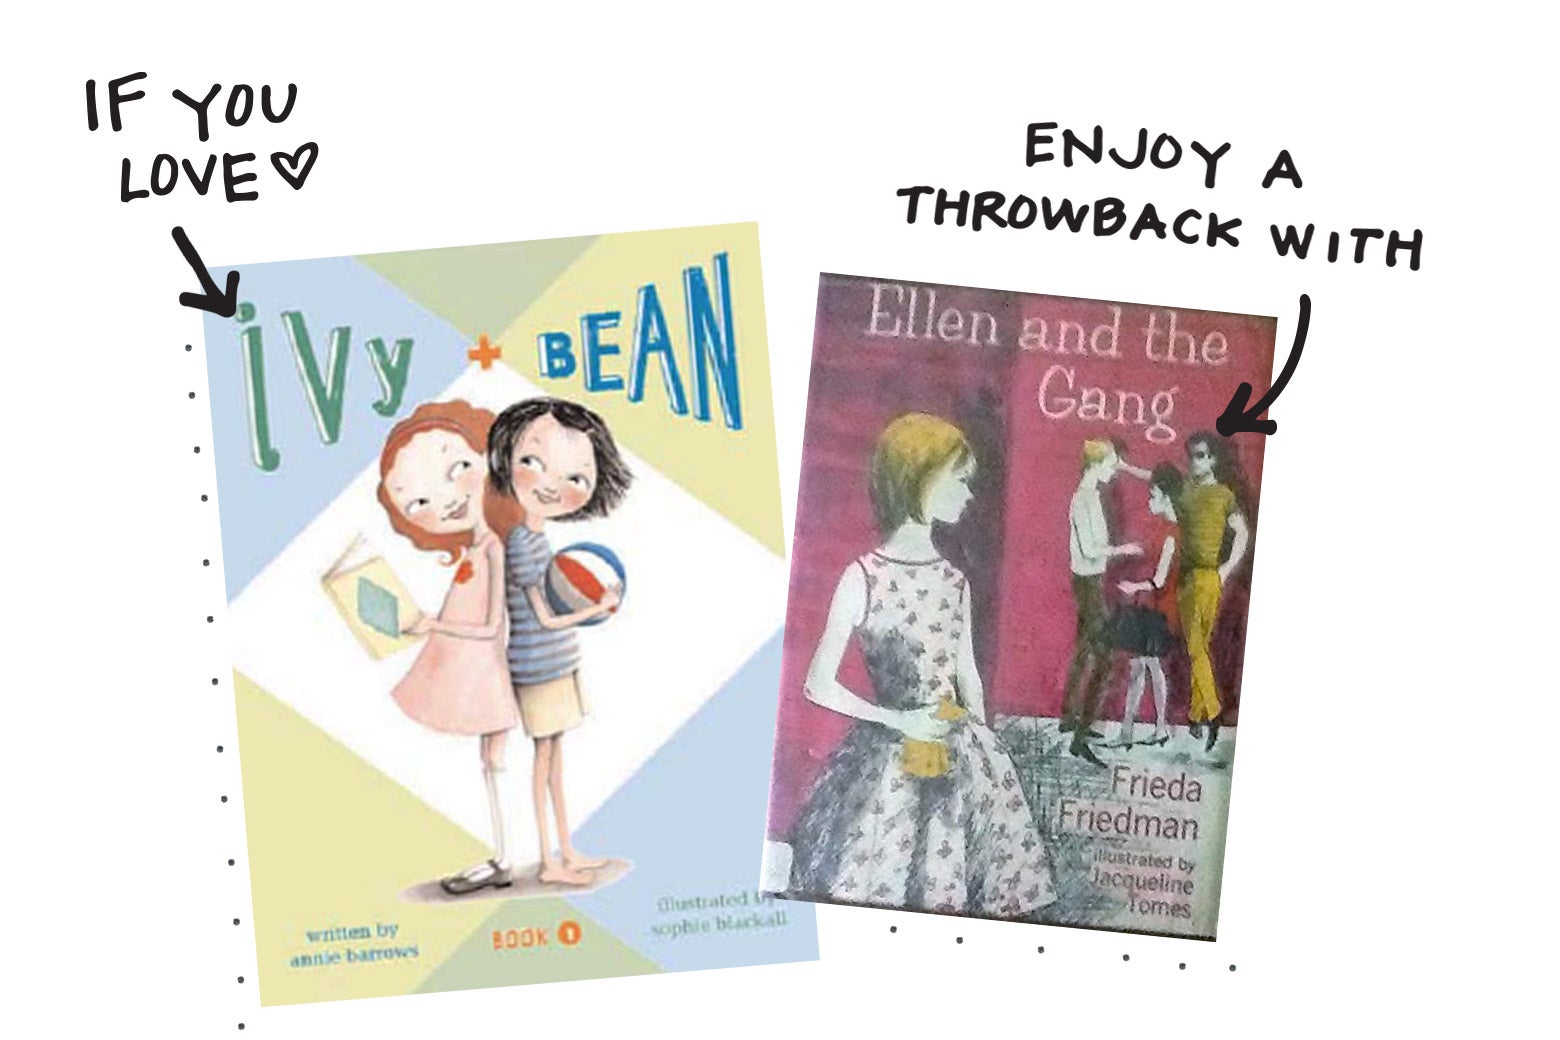 If you love Ivy + Bean, enjoy a throwback with Ellen and the Gang.